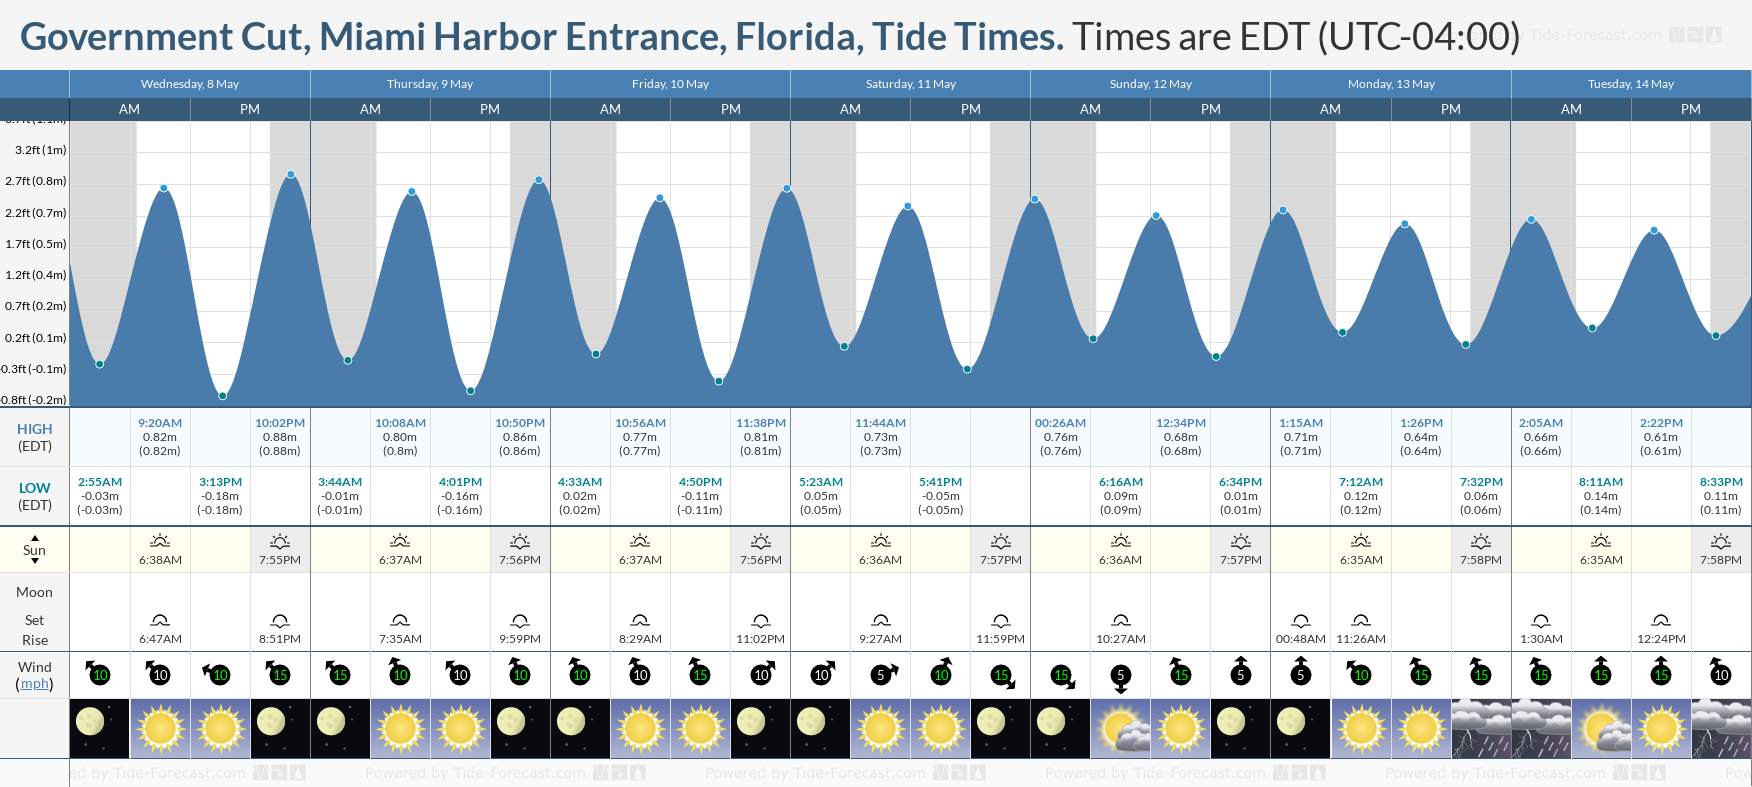 Government Cut, Miami Harbor Entrance, Florida Tide Chart including high and low tide tide times for the next 7 days